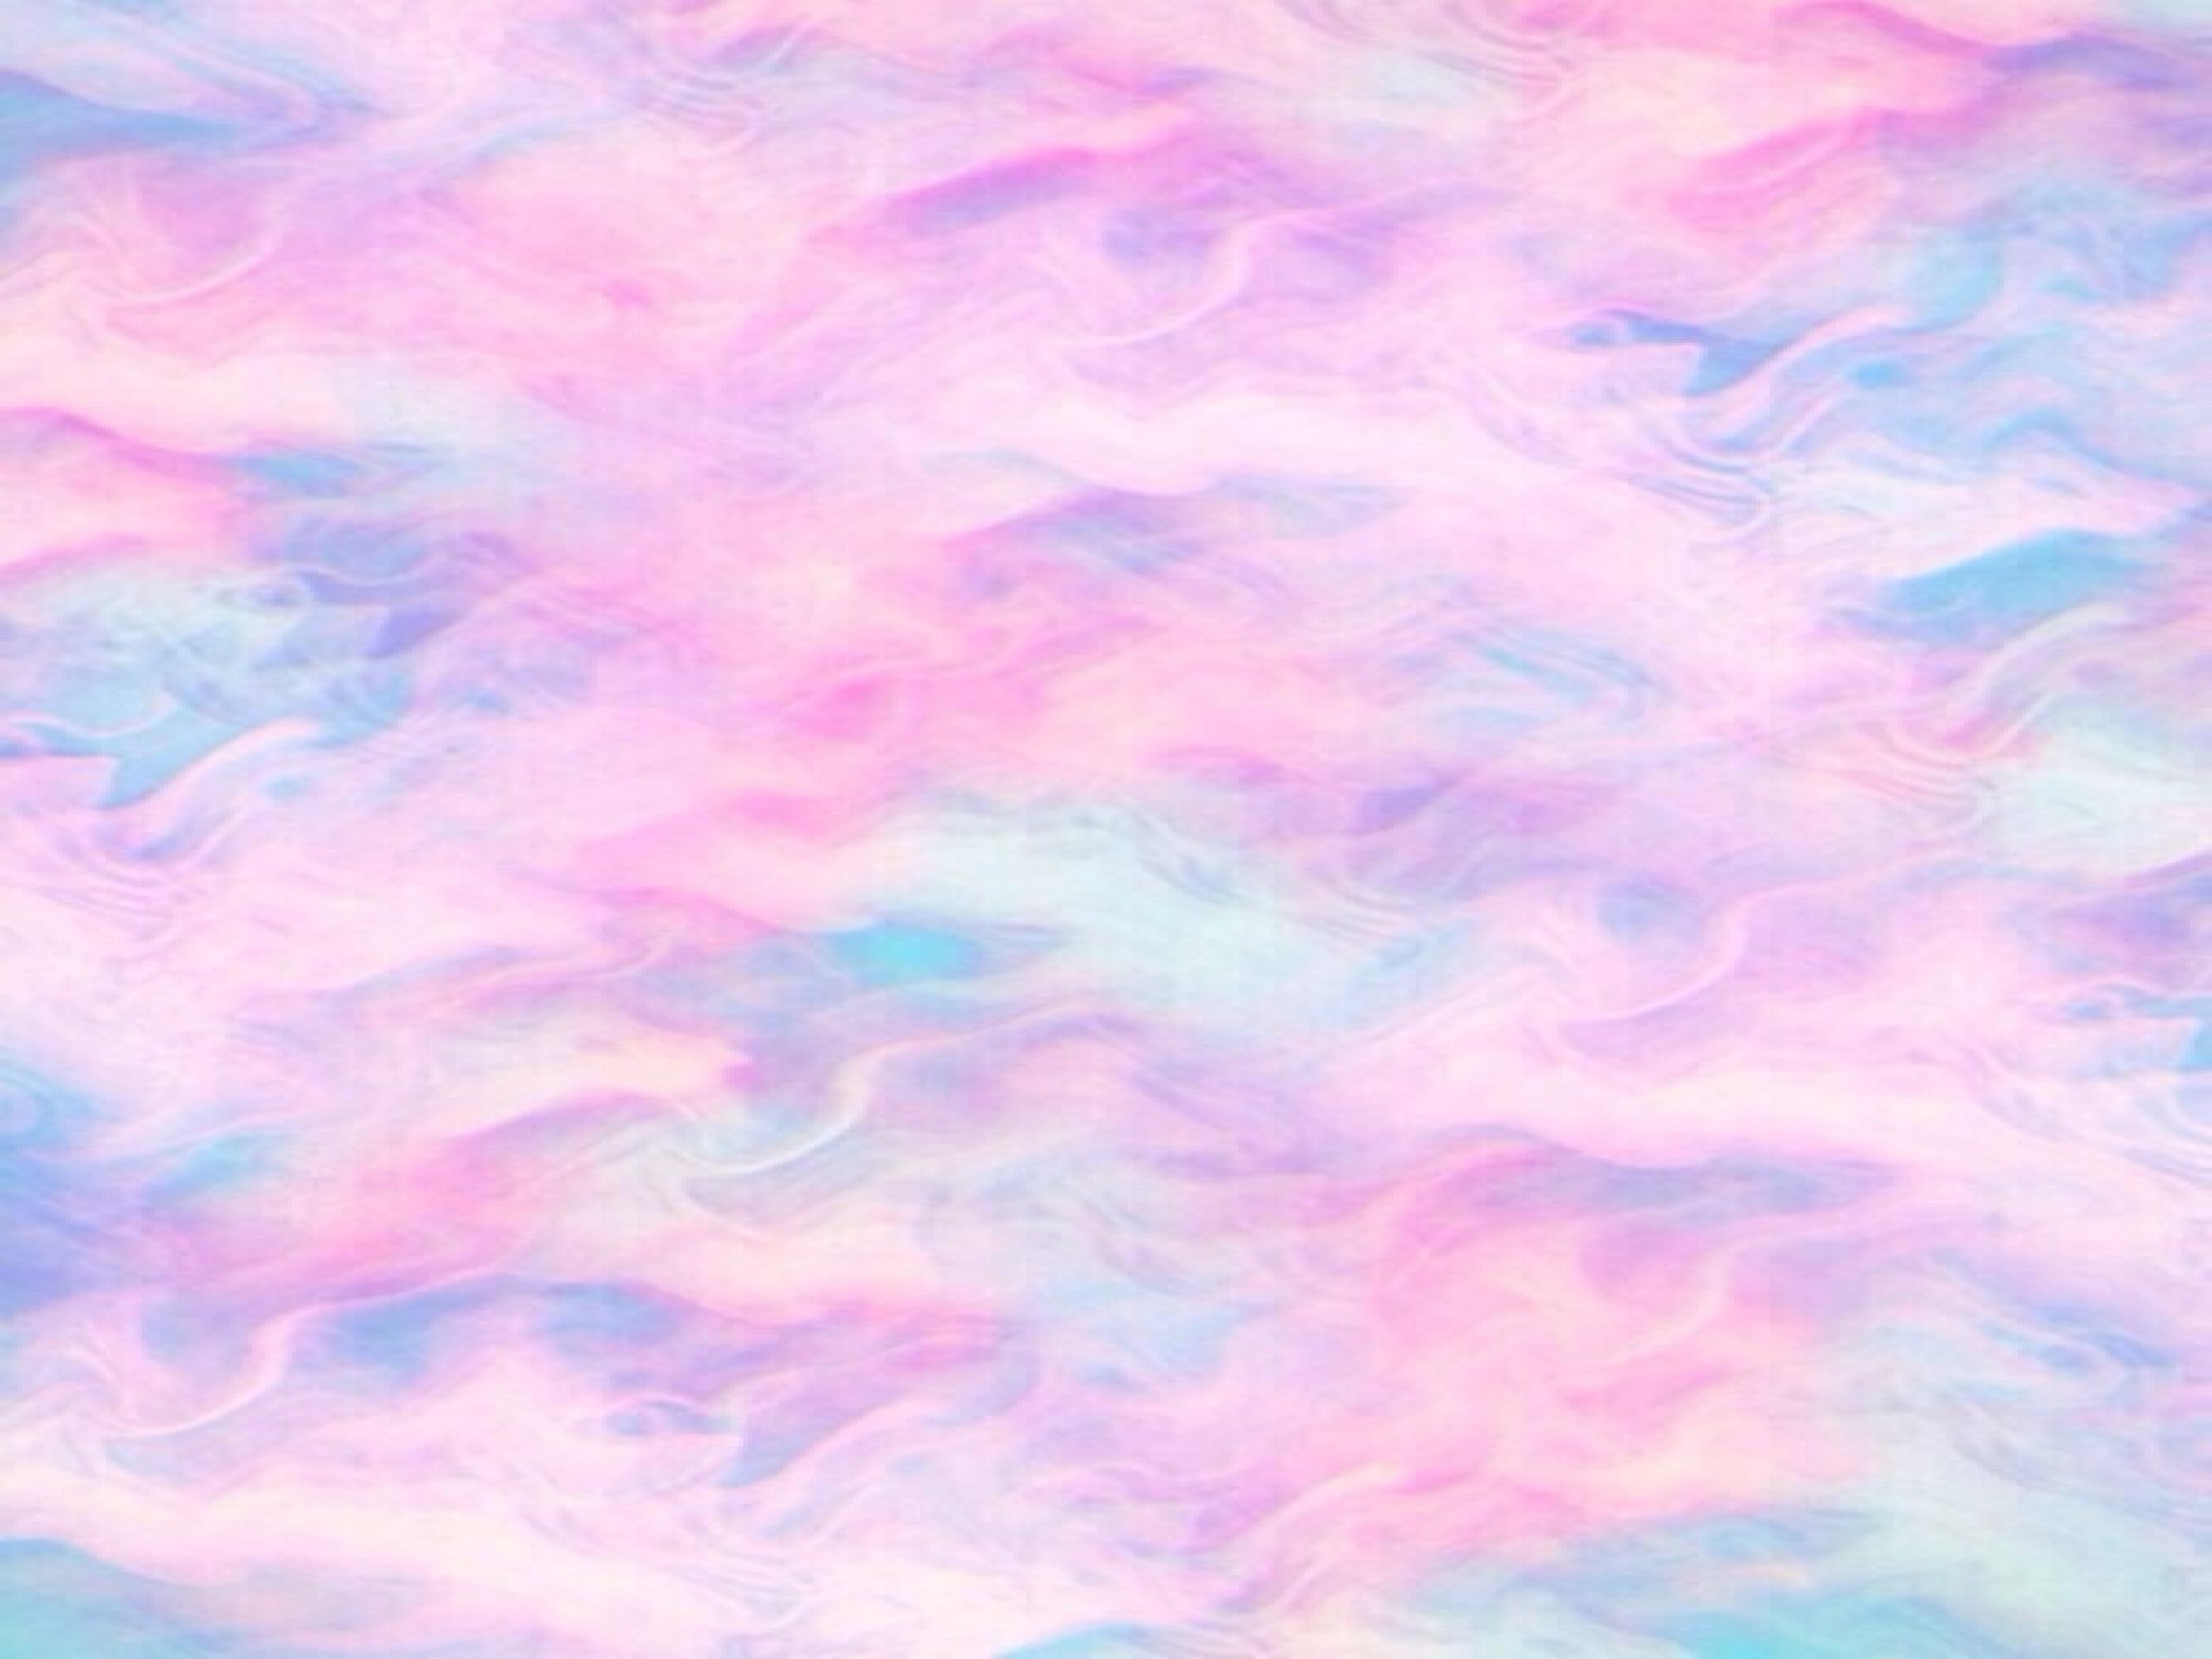 Cotton Candy Pink Wallpaper Free Cotton Candy Pink Background